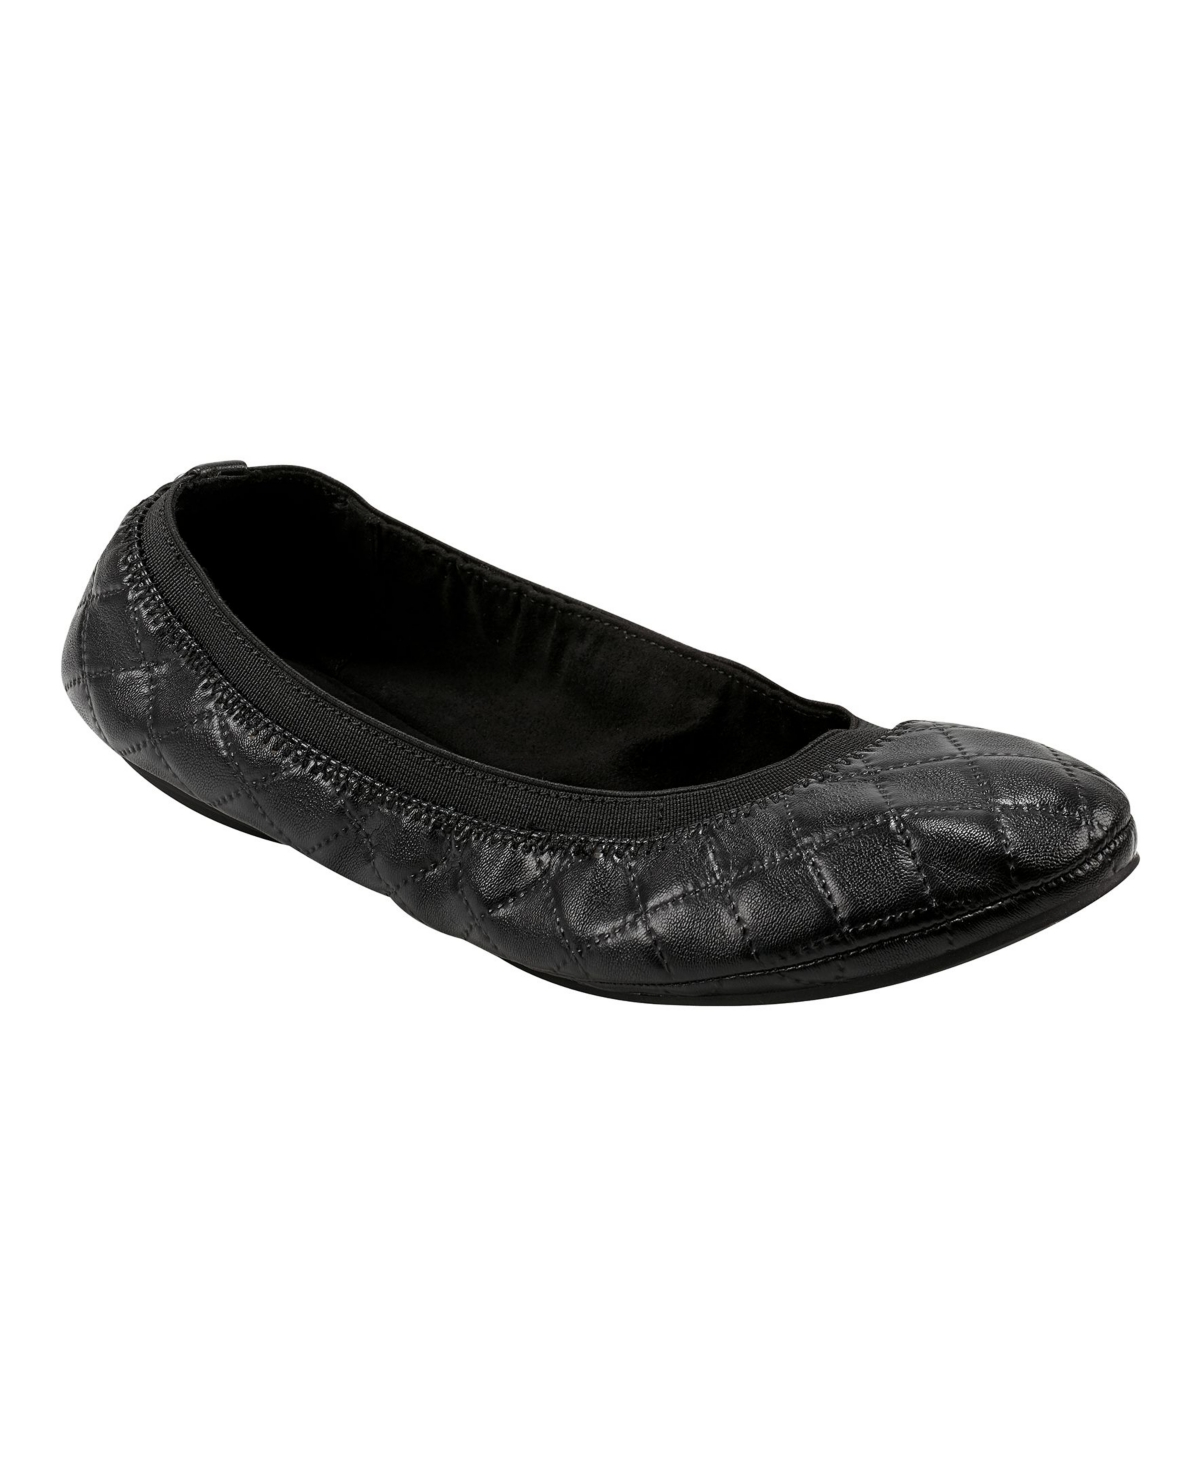 Women's Edition Ballet Flats - Quilted Black- Faux Leather, Textile